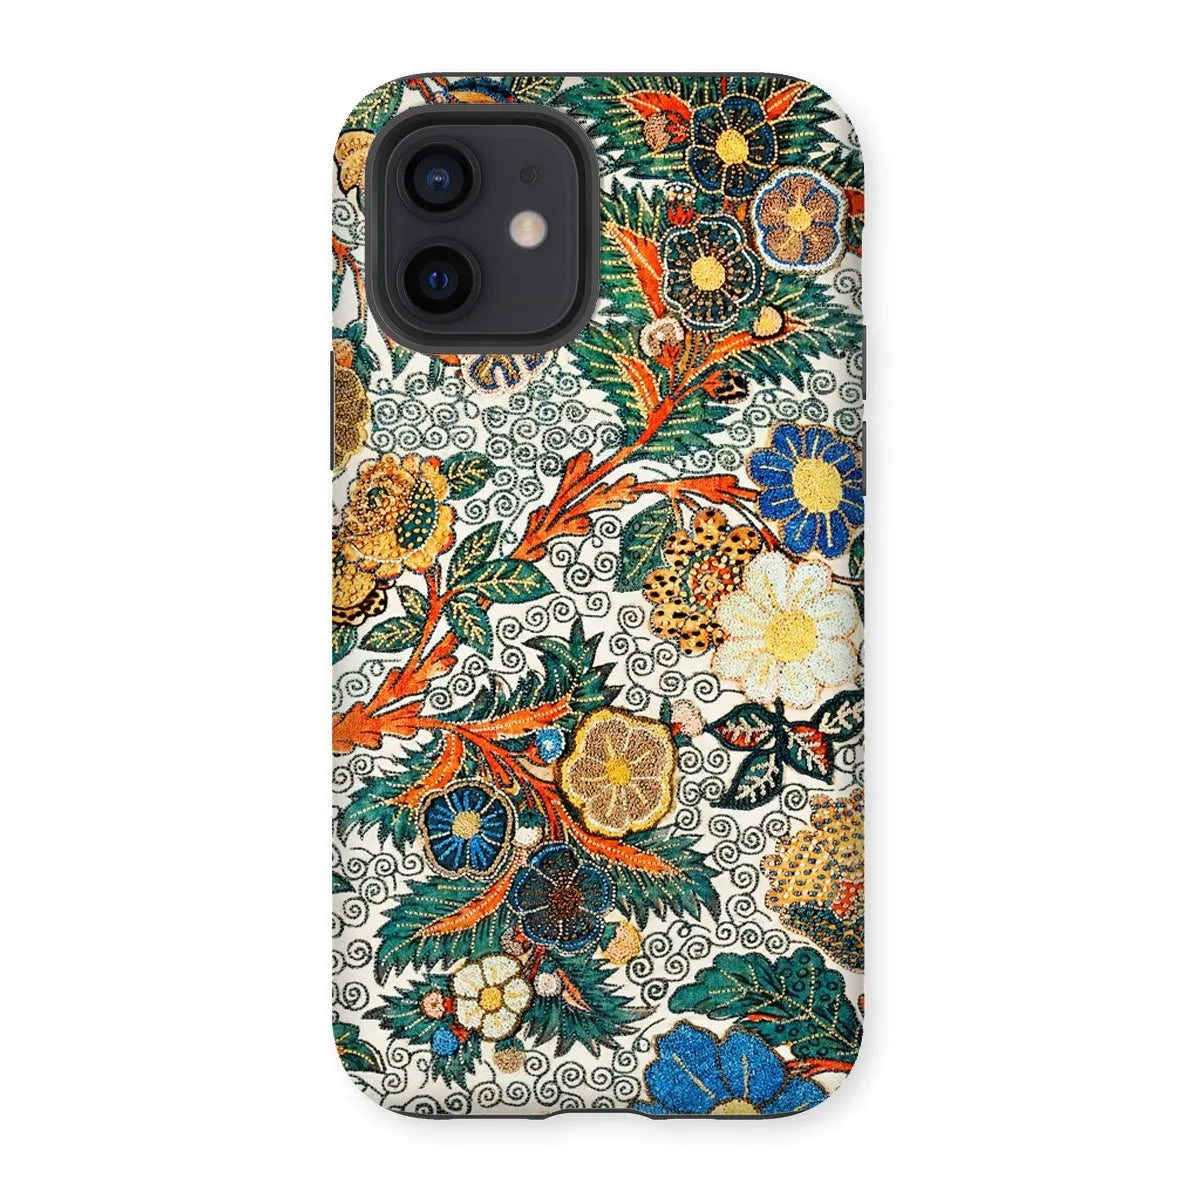 Blossomewhere Japanese Tapestry Art Phone Case - Iphone 12 / Matte - Mobile Phone Cases - Aesthetic Art